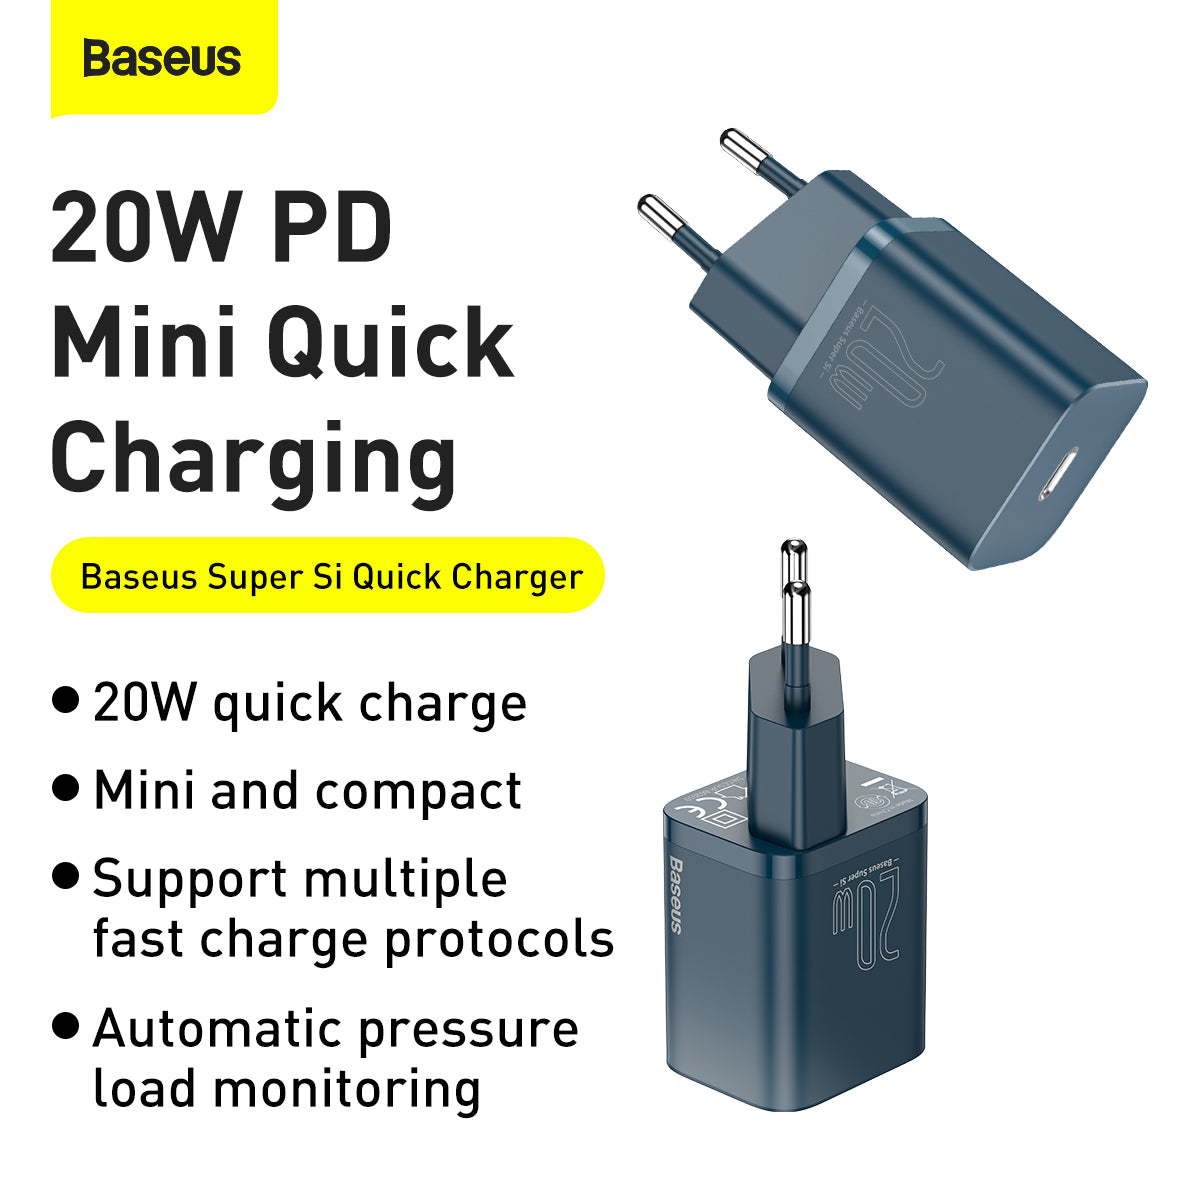 Baseus Super Si 20W Quick Charger and 1M Type C to iOS Cable - Blue